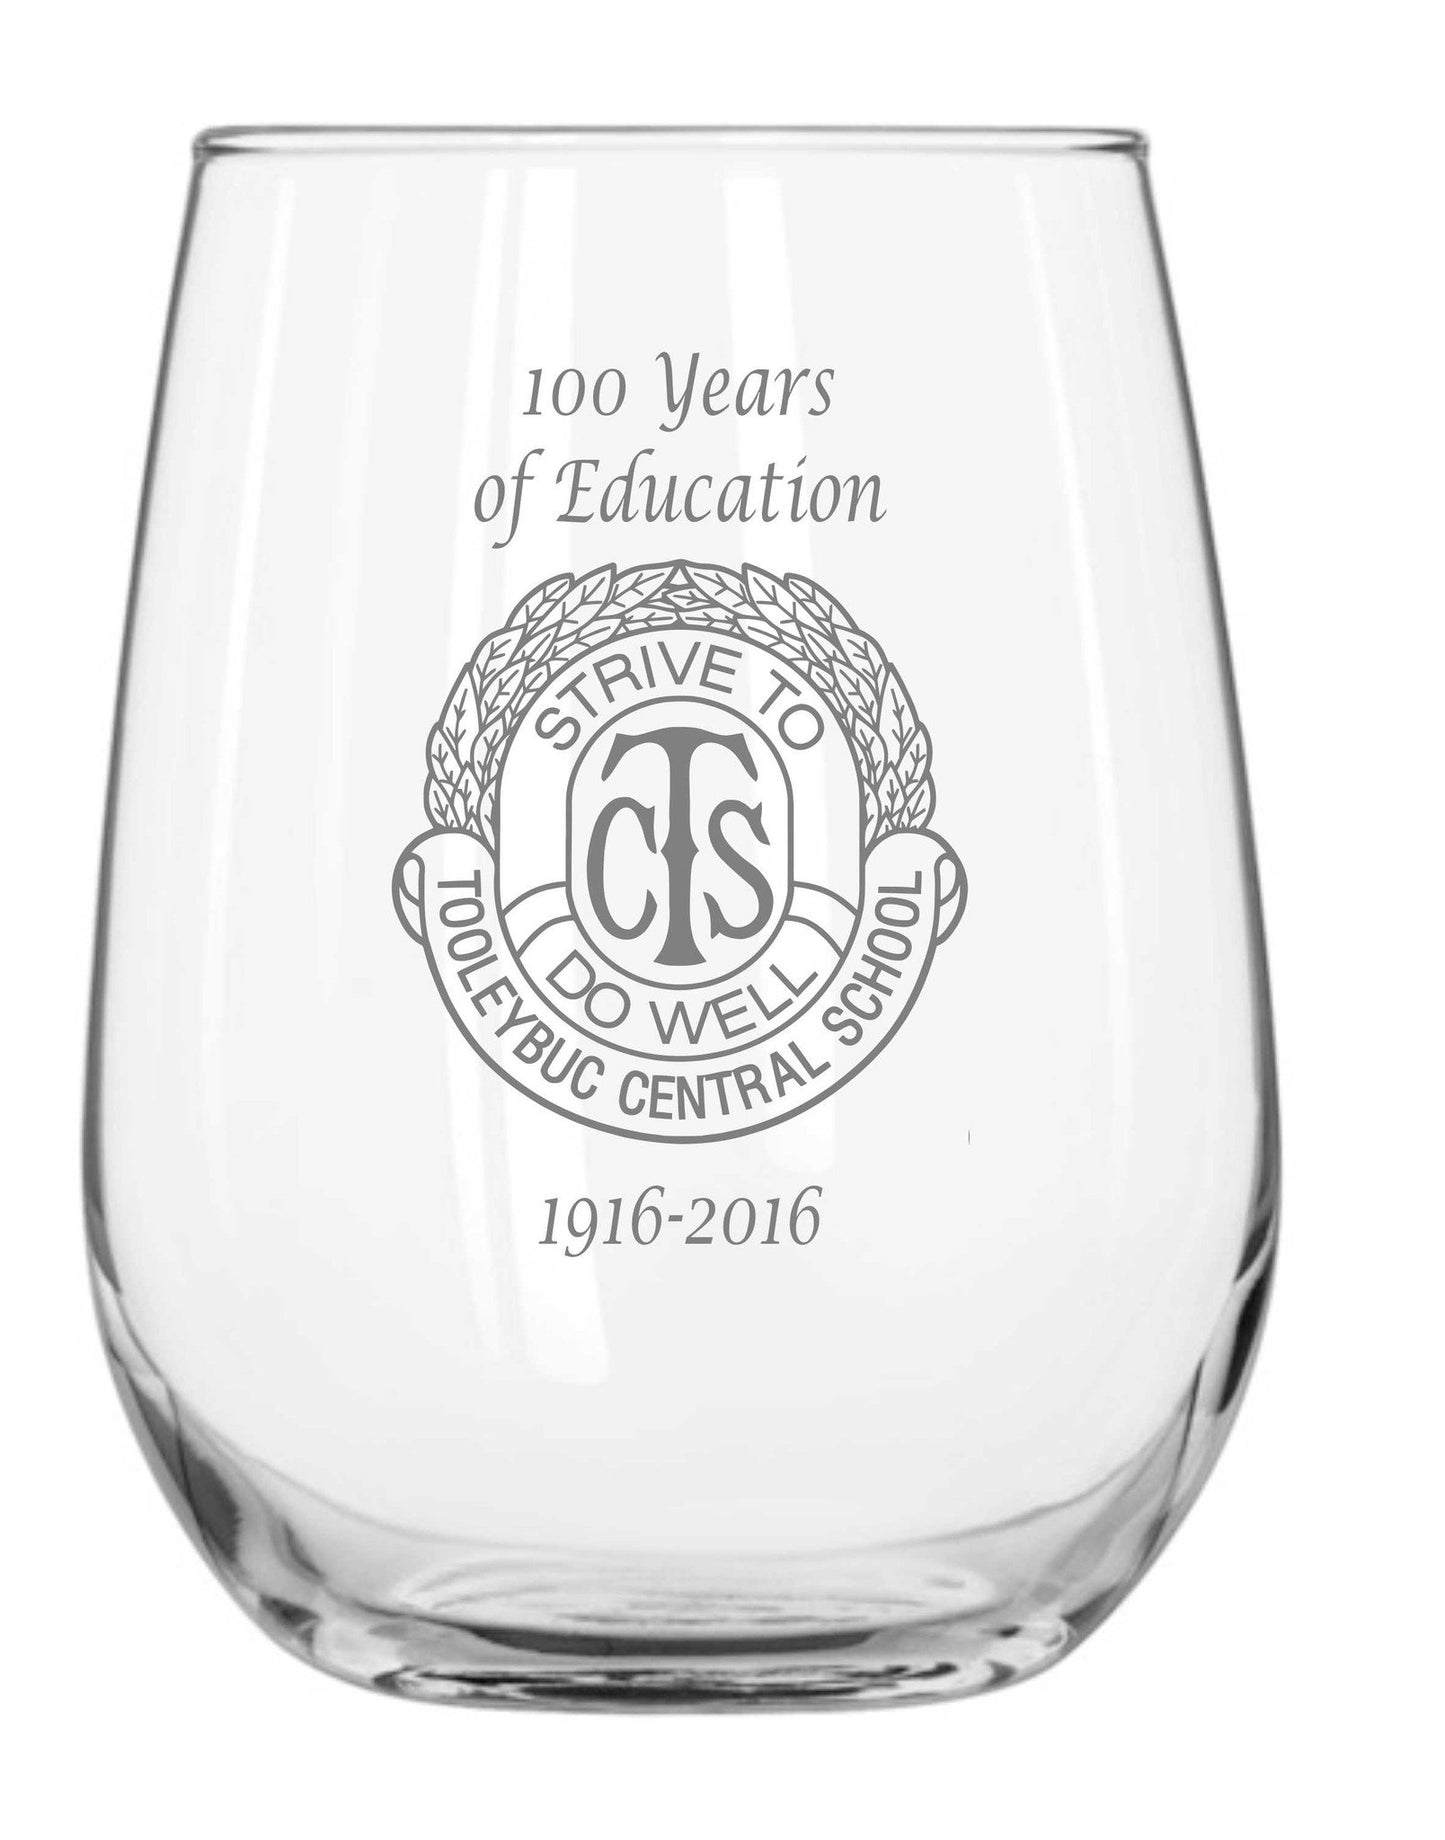 Personalised Glasses - Corporate - Stemless Wine Glass Engraved